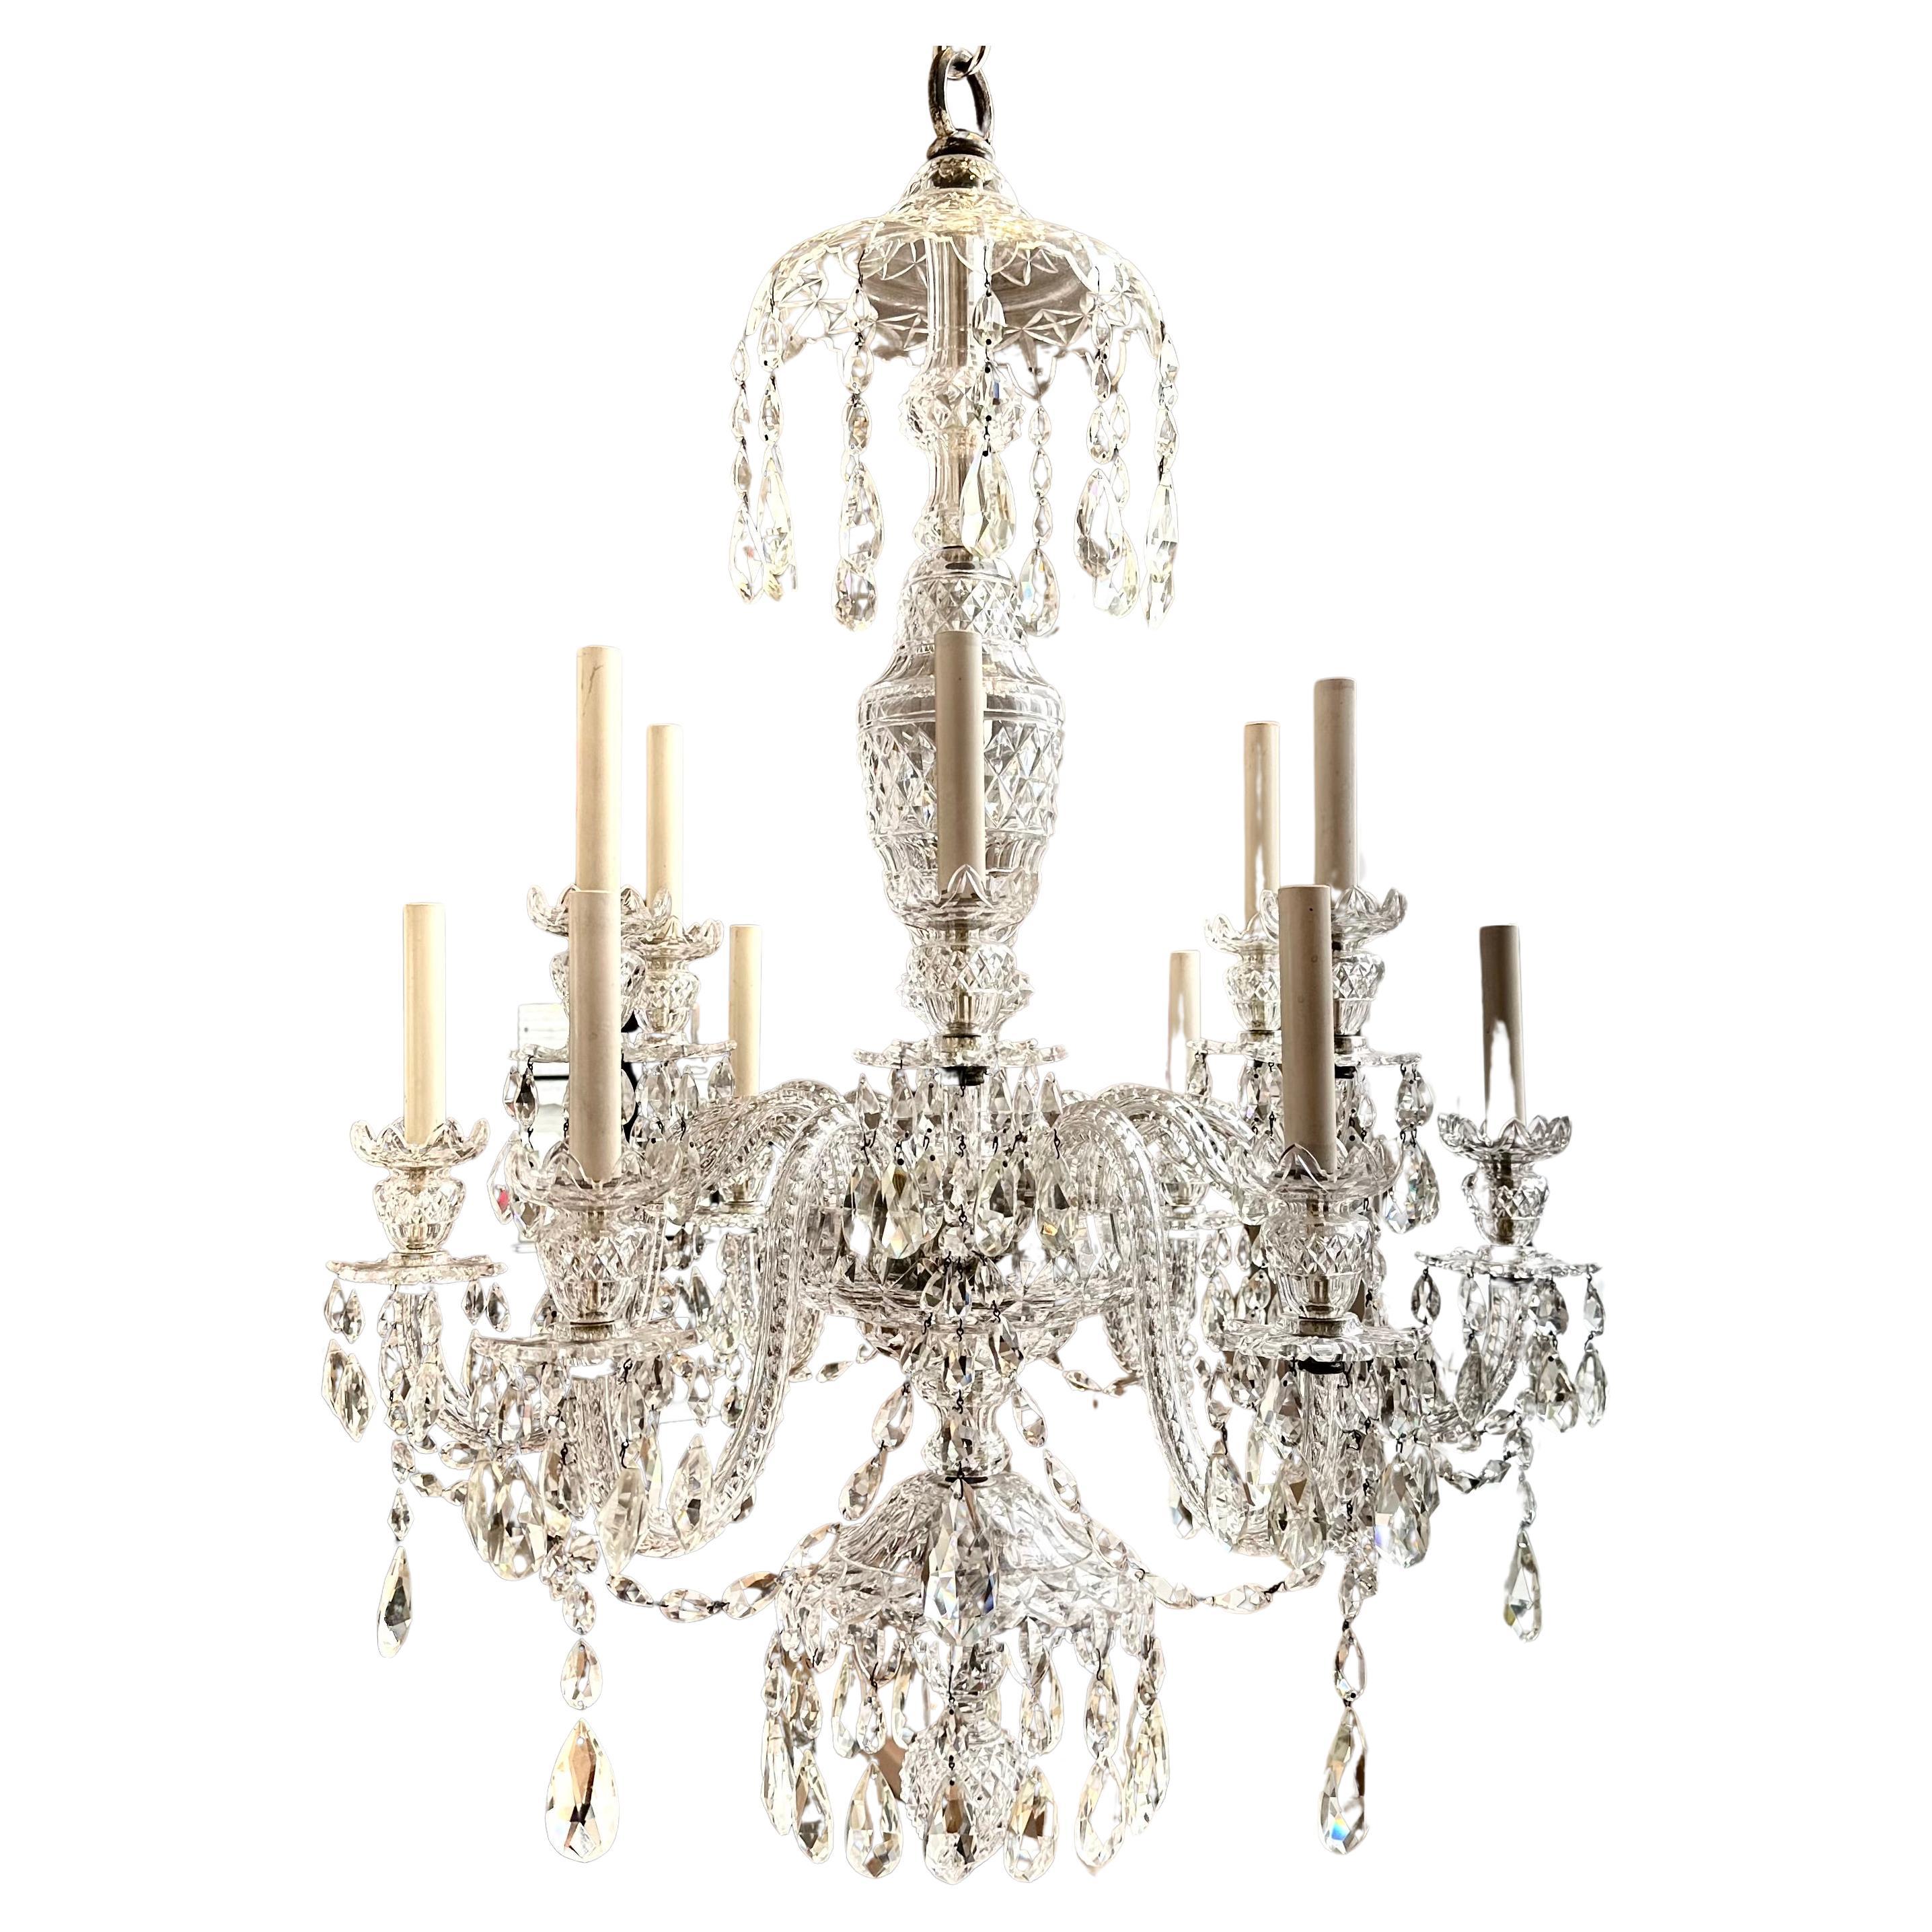 Early 20th century English cut crystal chandelier

--in character of Royal Brierley crystal
--All original, handout and in great condition
--Magnificent workmanship and color indicating English origin 
--silvered fittings throughout.
 